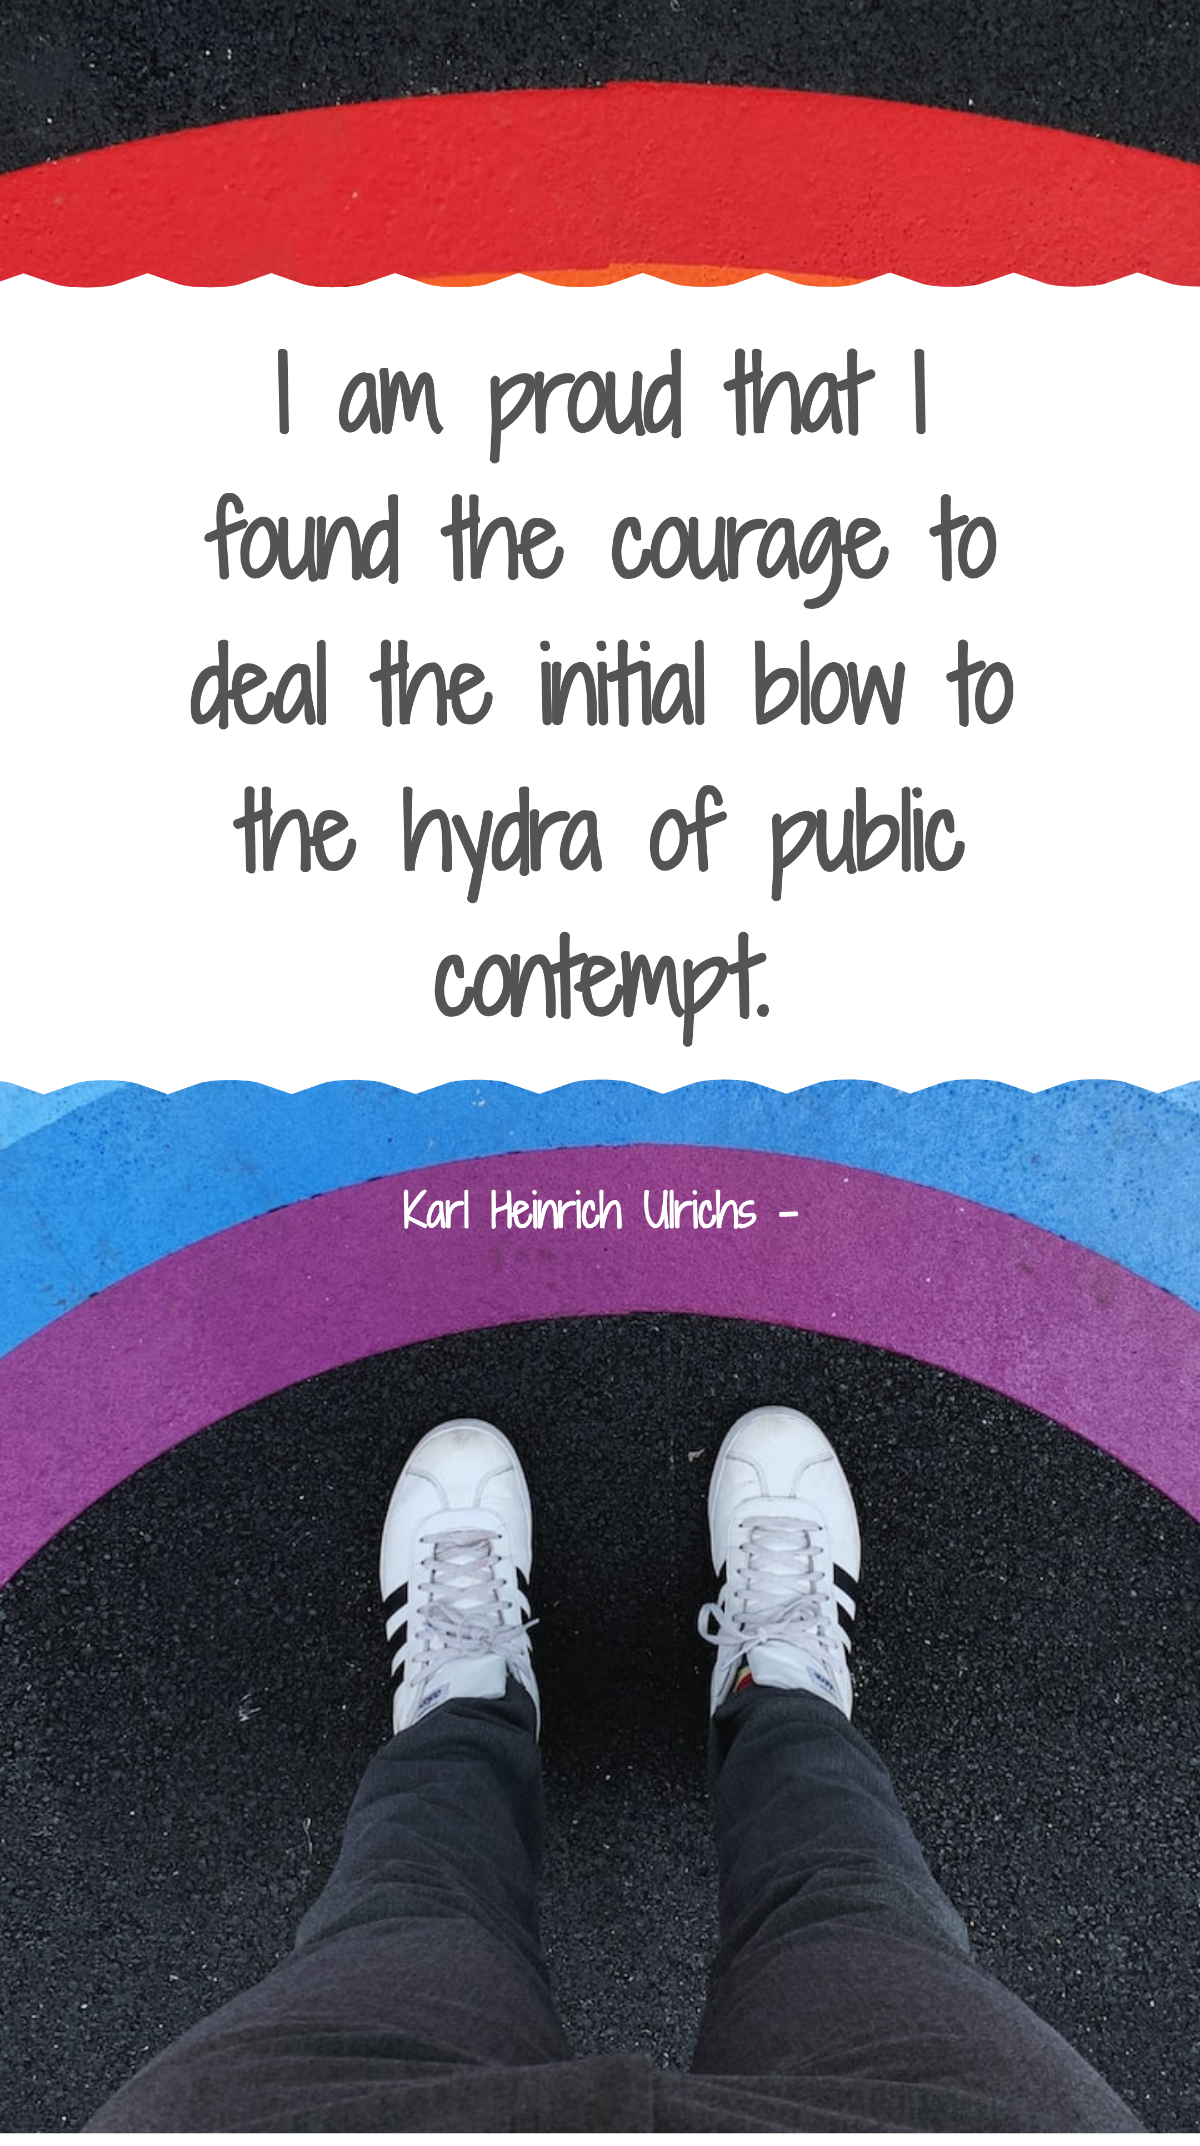 Karl Heinrich Ulrichs - I am proud that I found the courage to deal the initial blow to the hydra of public contempt. Template